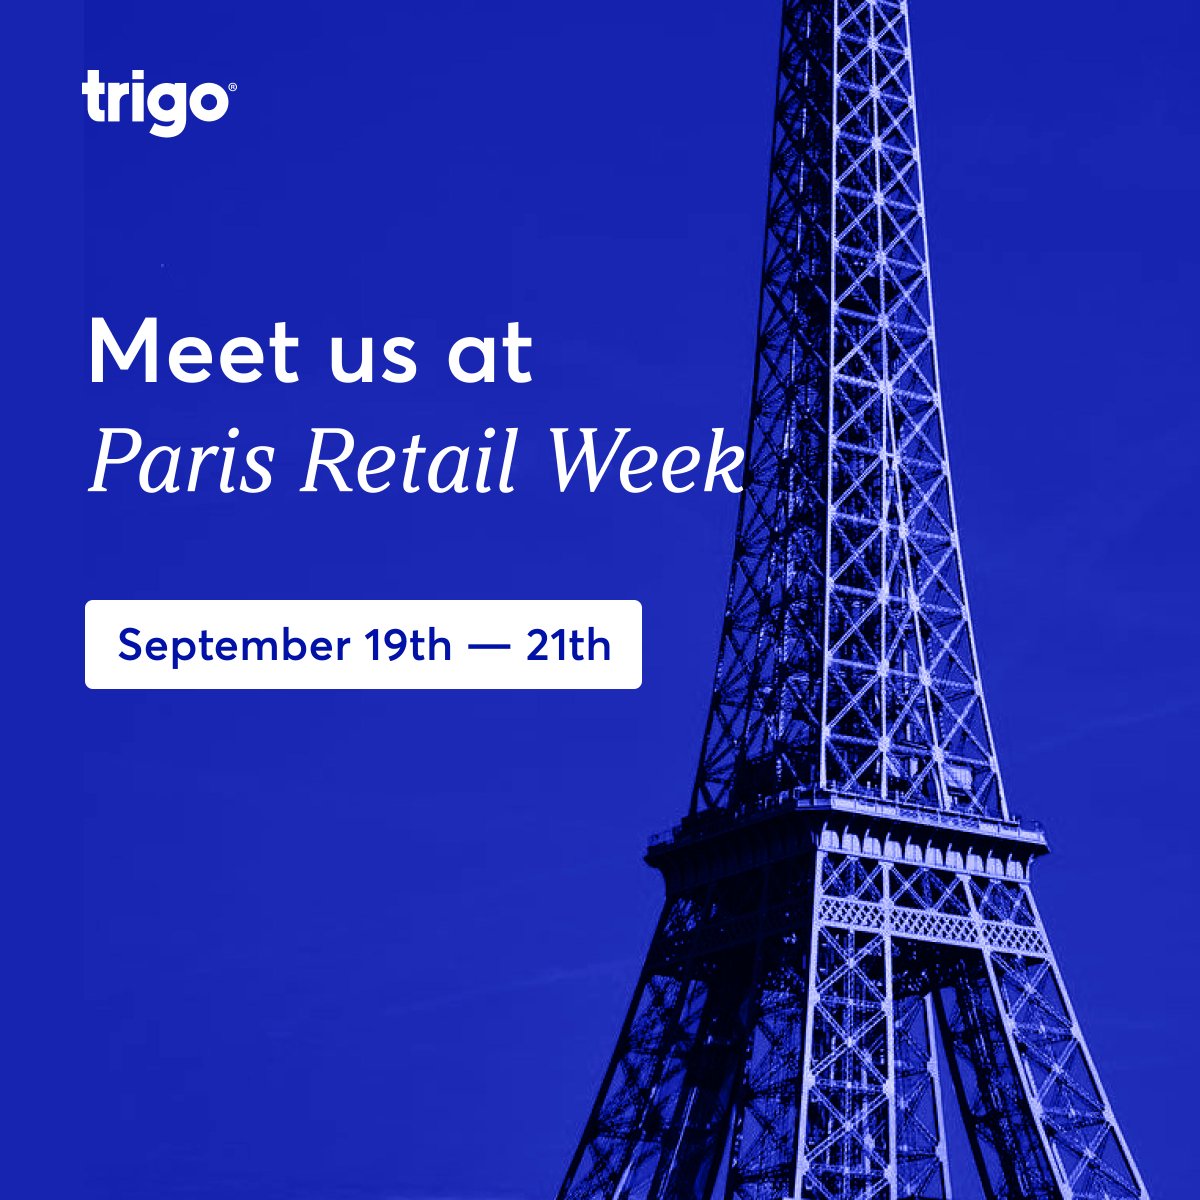 Don't miss the chance to meet our business team at Paris Retail Week! Discover how Trigo can transform your business with AI-driven store automation. Schedule a meeting now: bit.ly/48eiaFs #ParisRetailWeek #Trigo #AI #storeautomation